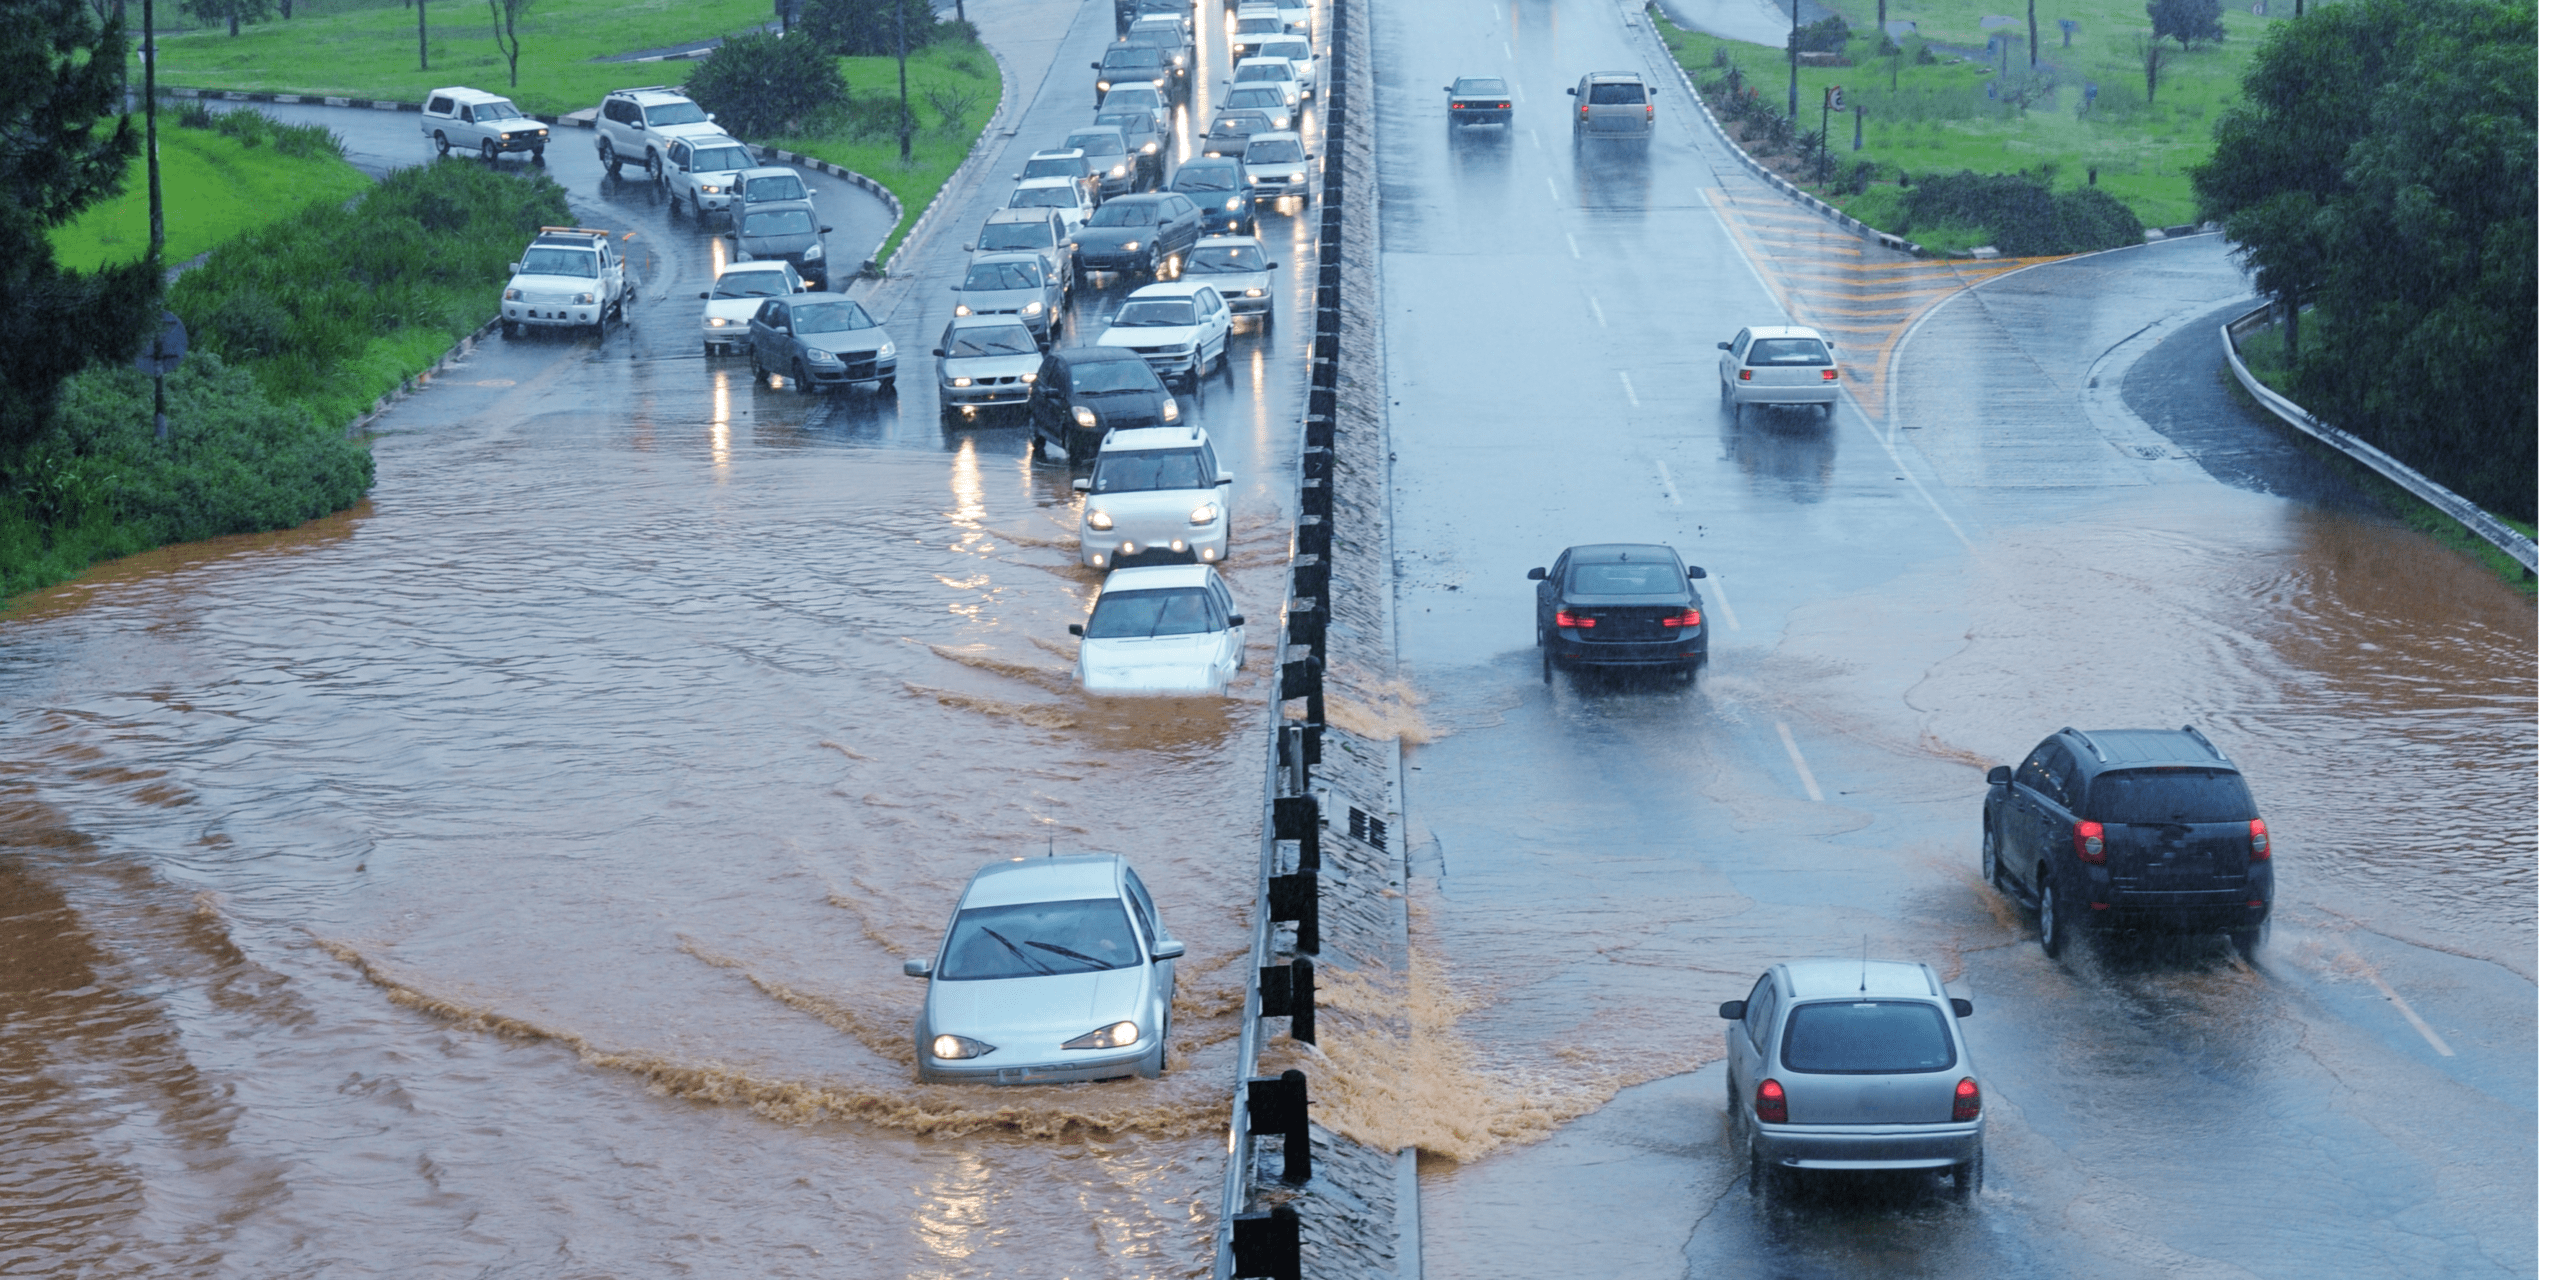 Cars driving on a flooded road.